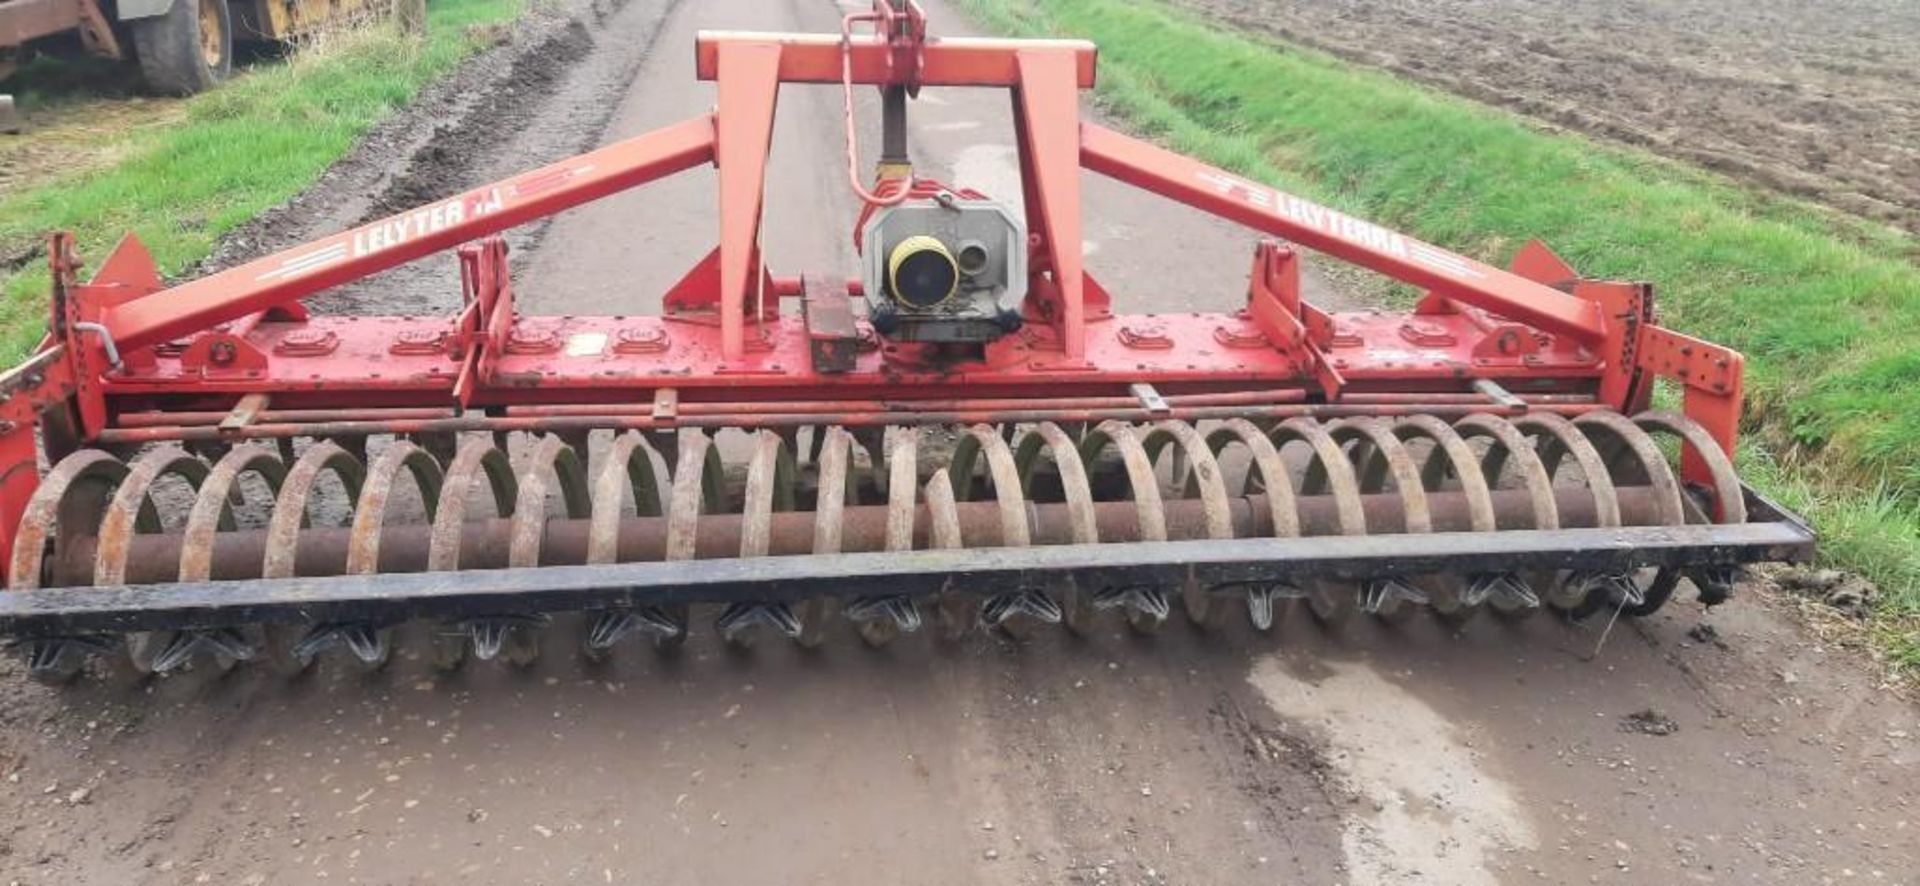 Lely 3.5m Power Harrow - (Lincolnshire) - Image 3 of 3